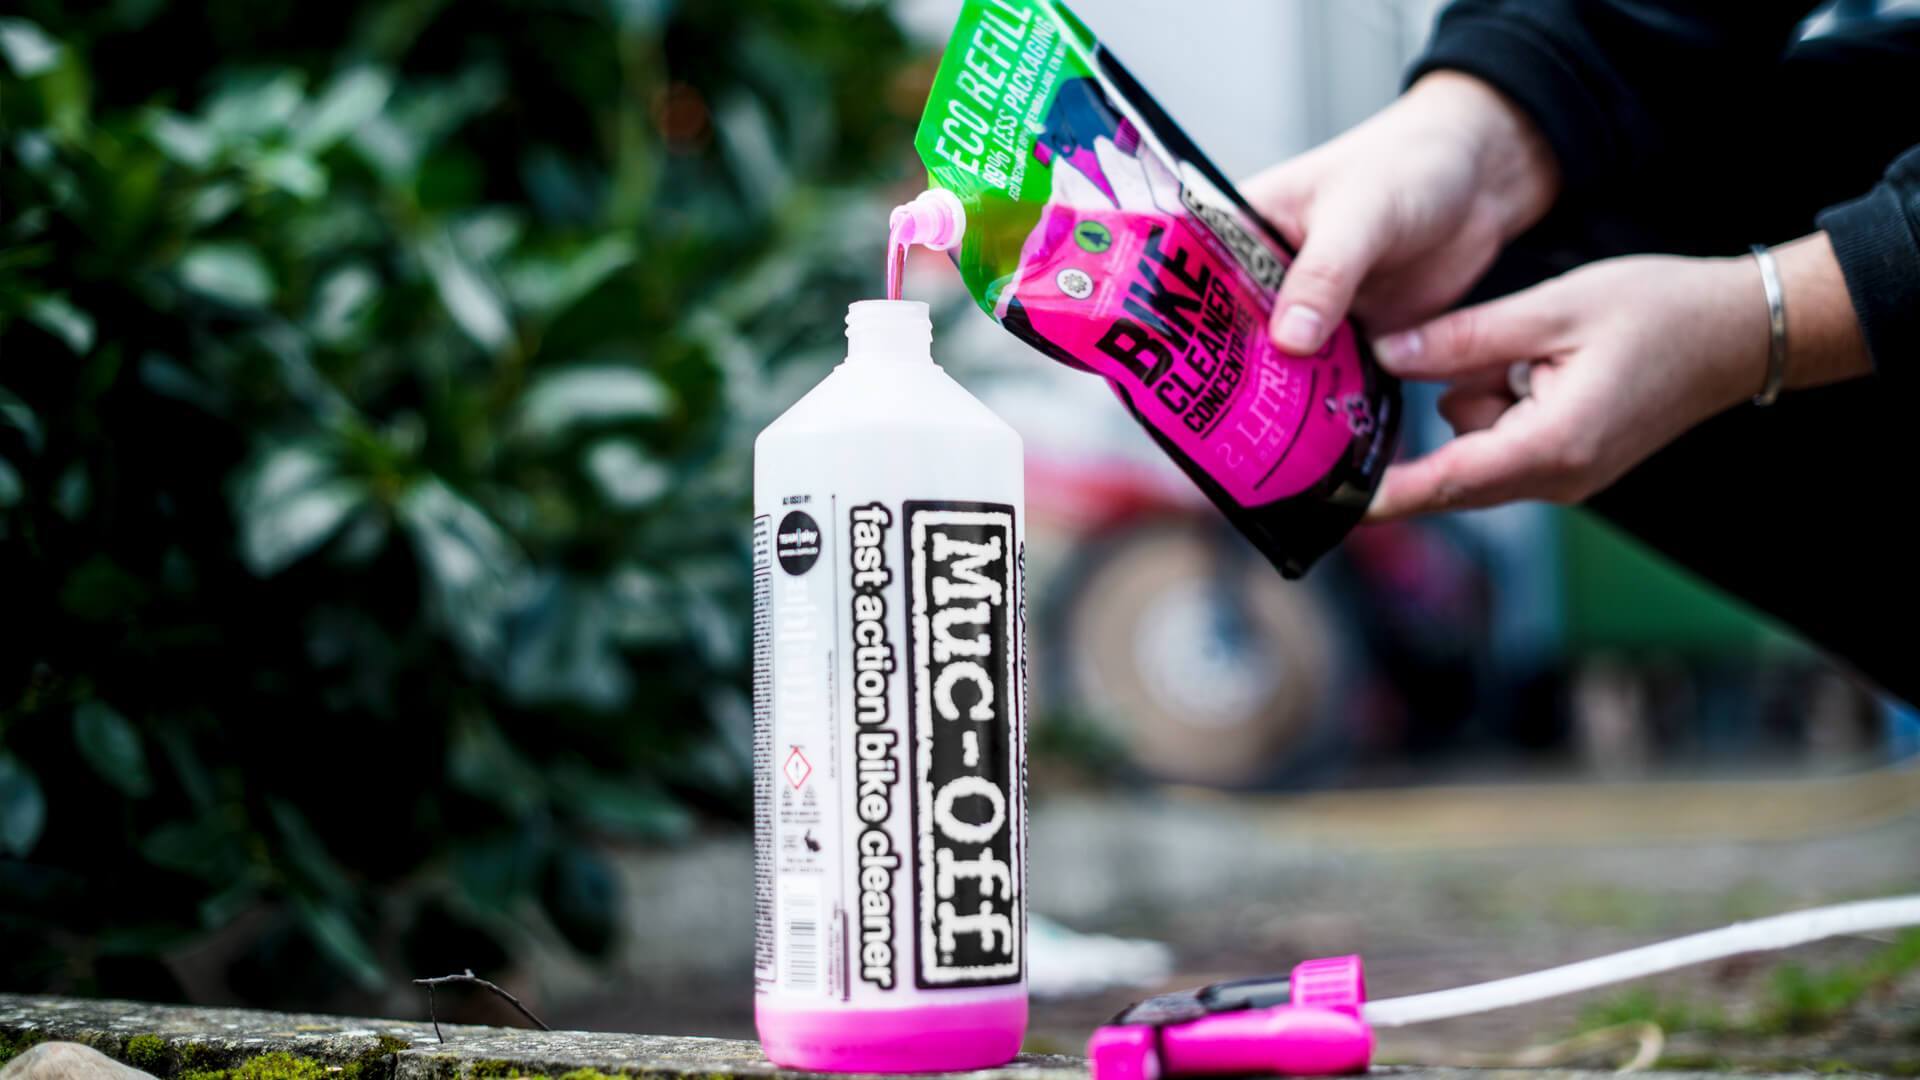 Muc-Off - Nano Gel Cleaner Concentrate (1 Litre)